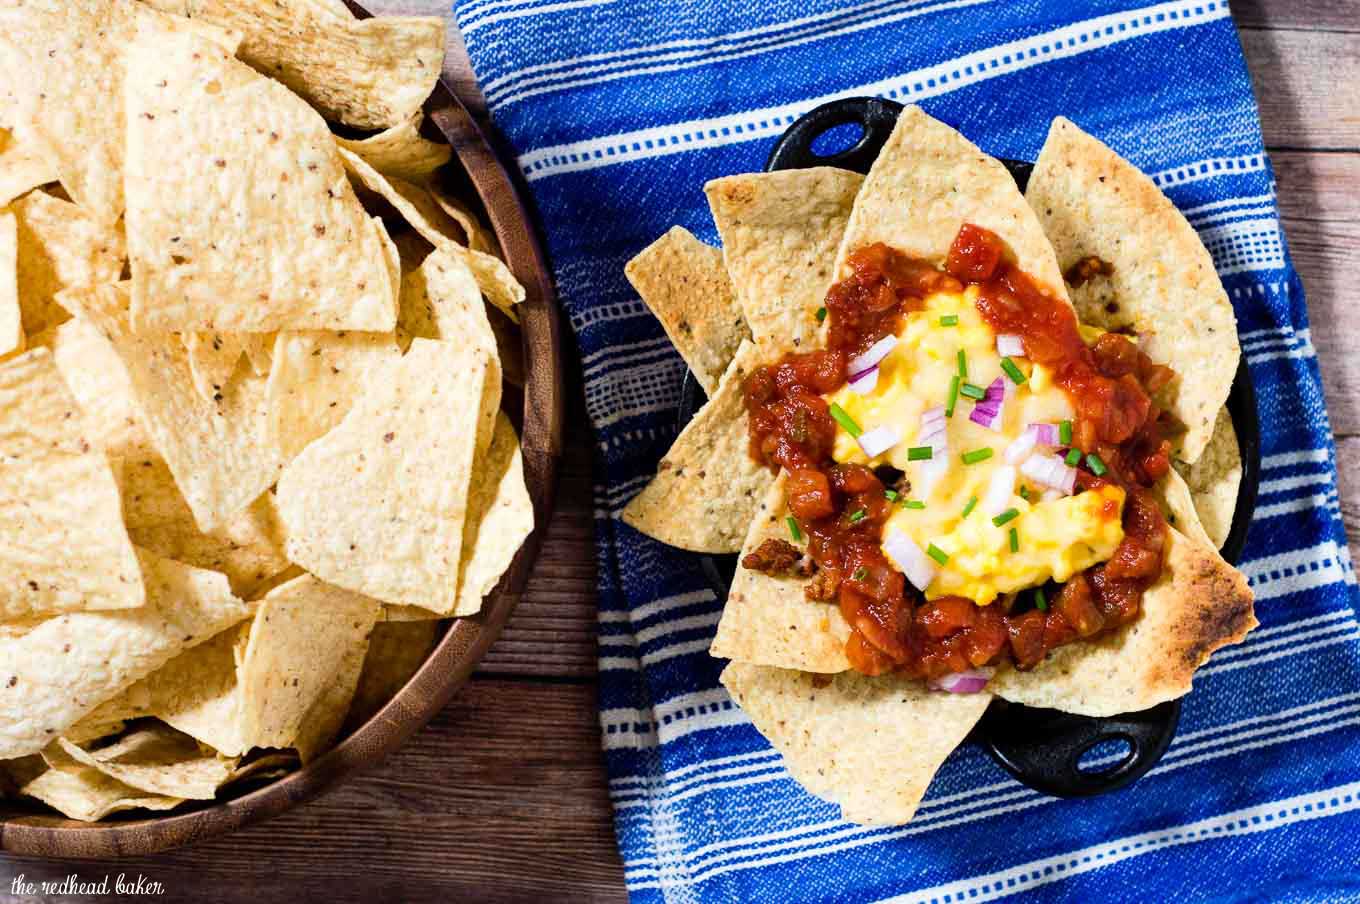 Chilaquiles are a Mexican brunch dish that will really wake you up! Tortilla chips are topped with scrambled eggs, spicy chorizo, salsa and cheese. #BrunchWeek